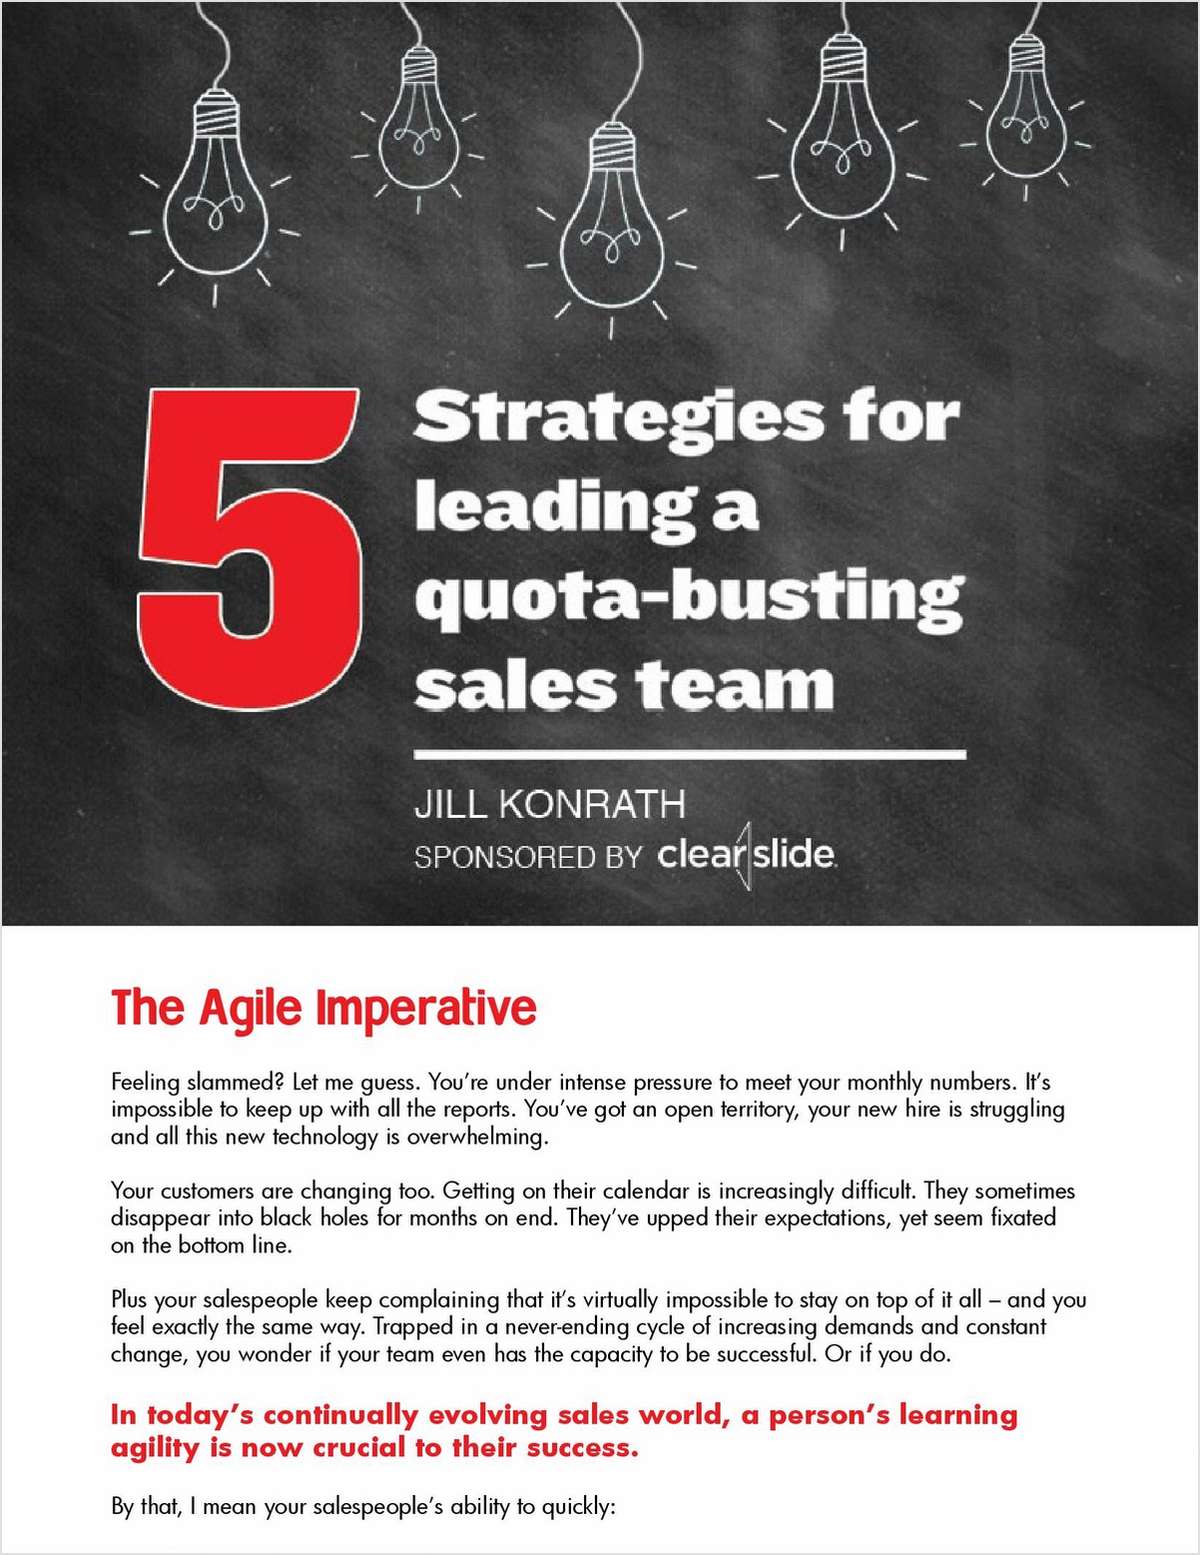 5 Strategies for Leading a Quota-Busting Sales Team